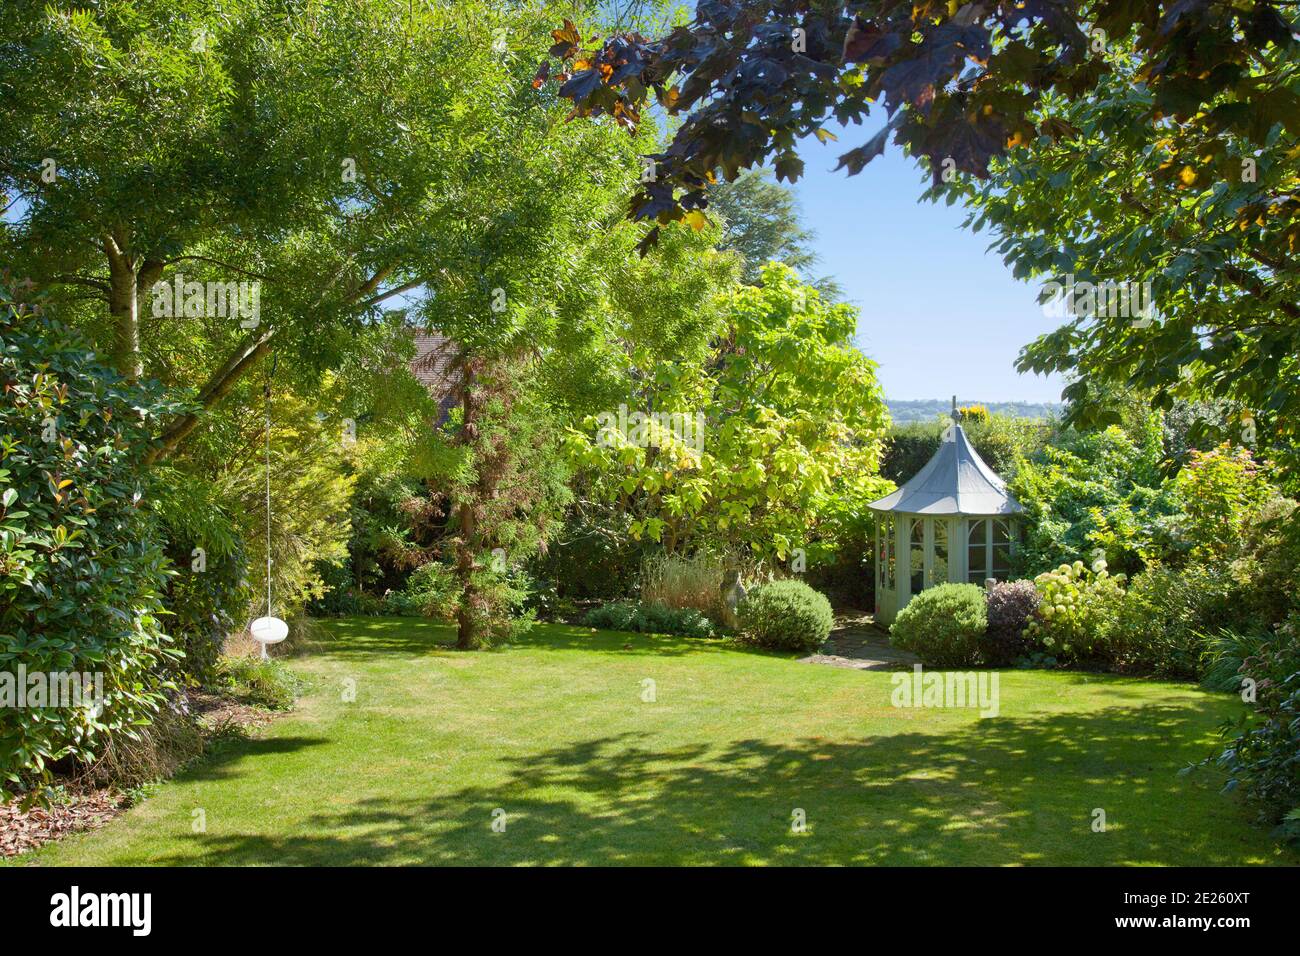 Octagonal gazebo surrounded by trees in mature garden with lawn and swing in summer Stock Photo